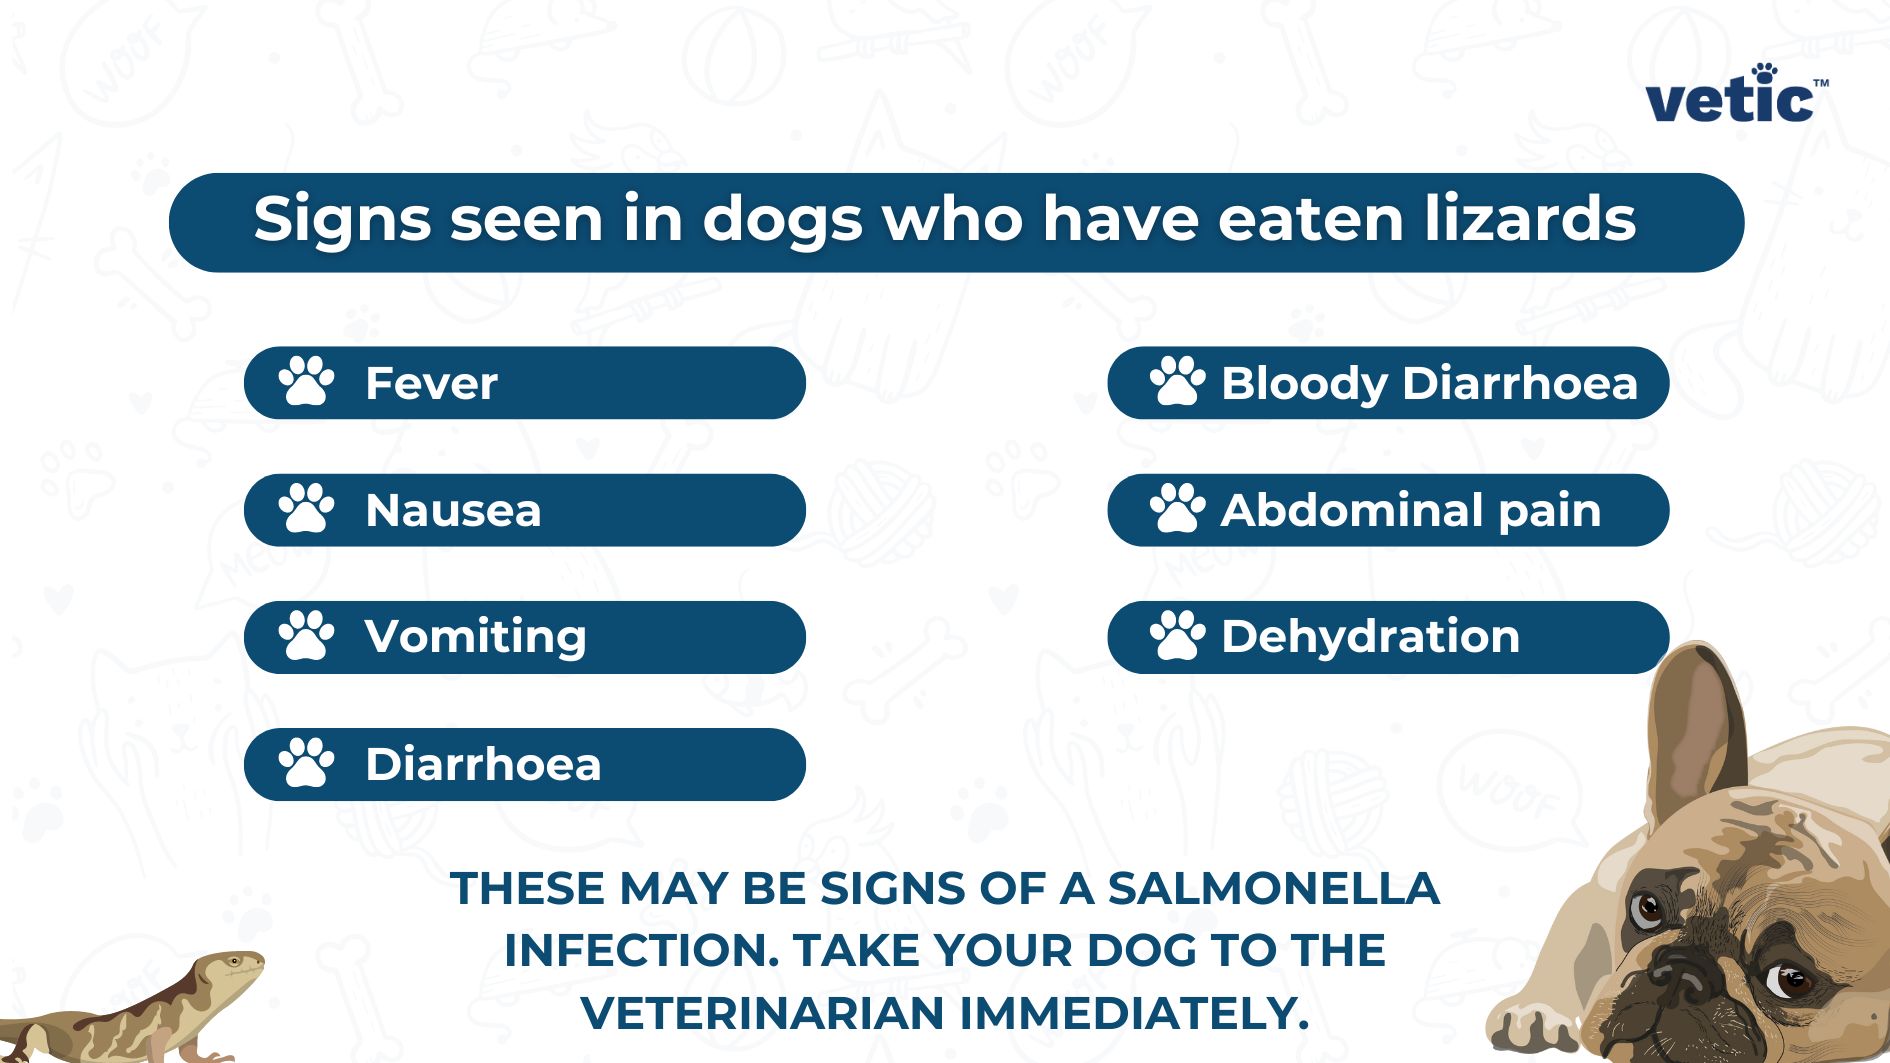 Informational graphic that lists various symptoms a dog may exhibit after eating lizards, such as fever, nausea, vomiting, diarrhea, bloody diarrhea, abdominal pain, and dehydration. It advises that if these symptoms are observed, the dog should be taken to a veterinarian immediately as they may be signs of a salmonella infection. It’s important to seek professional veterinary care in such situations.